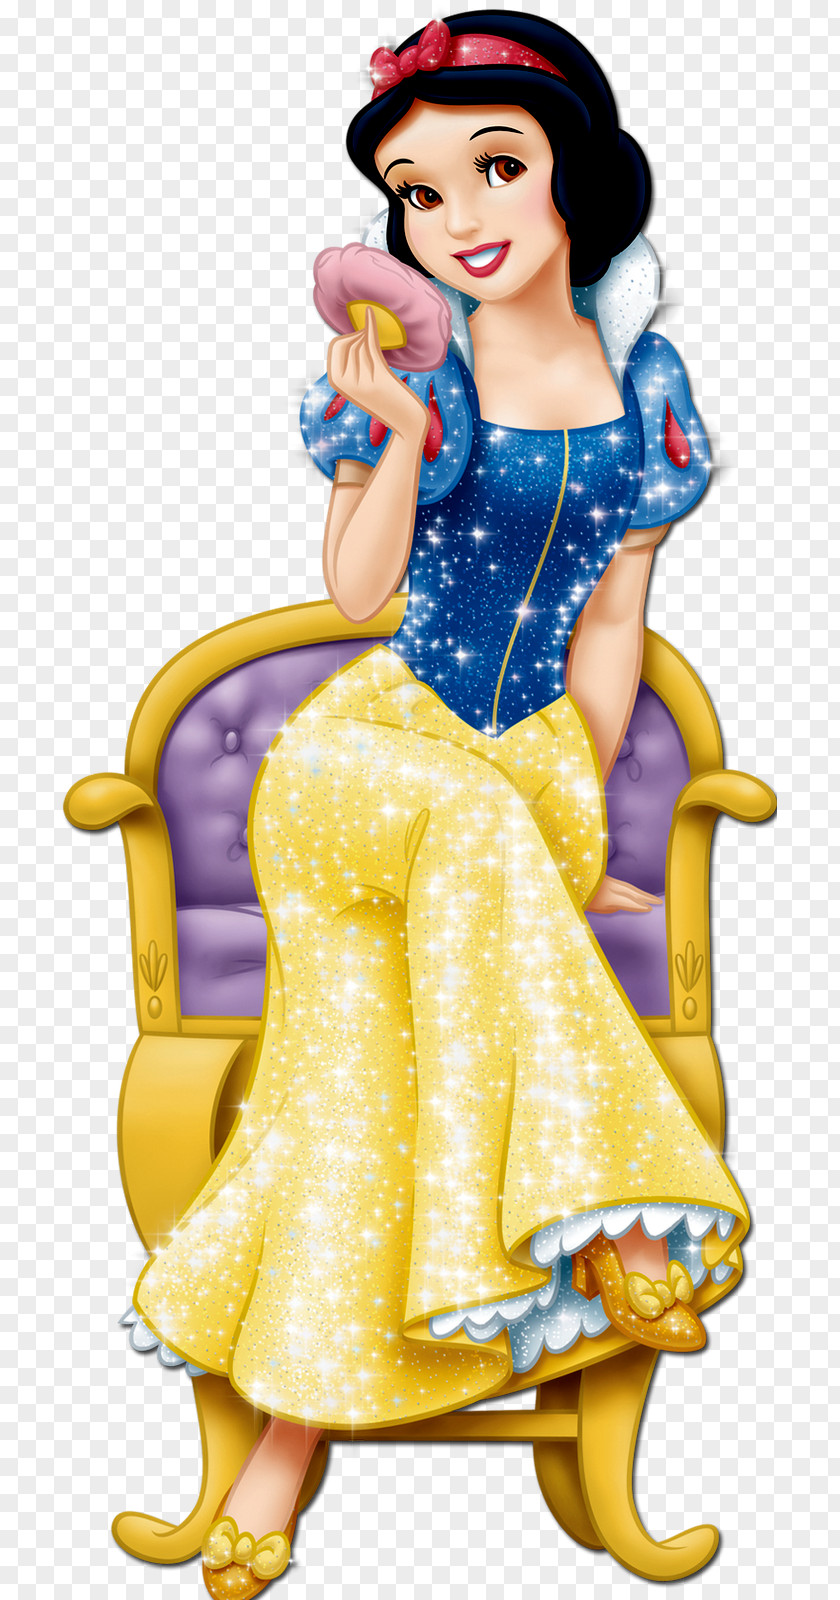 De Princess Jasmine Snow White And The Seven Dwarfs Minnie Mouse Askepot Mickey PNG